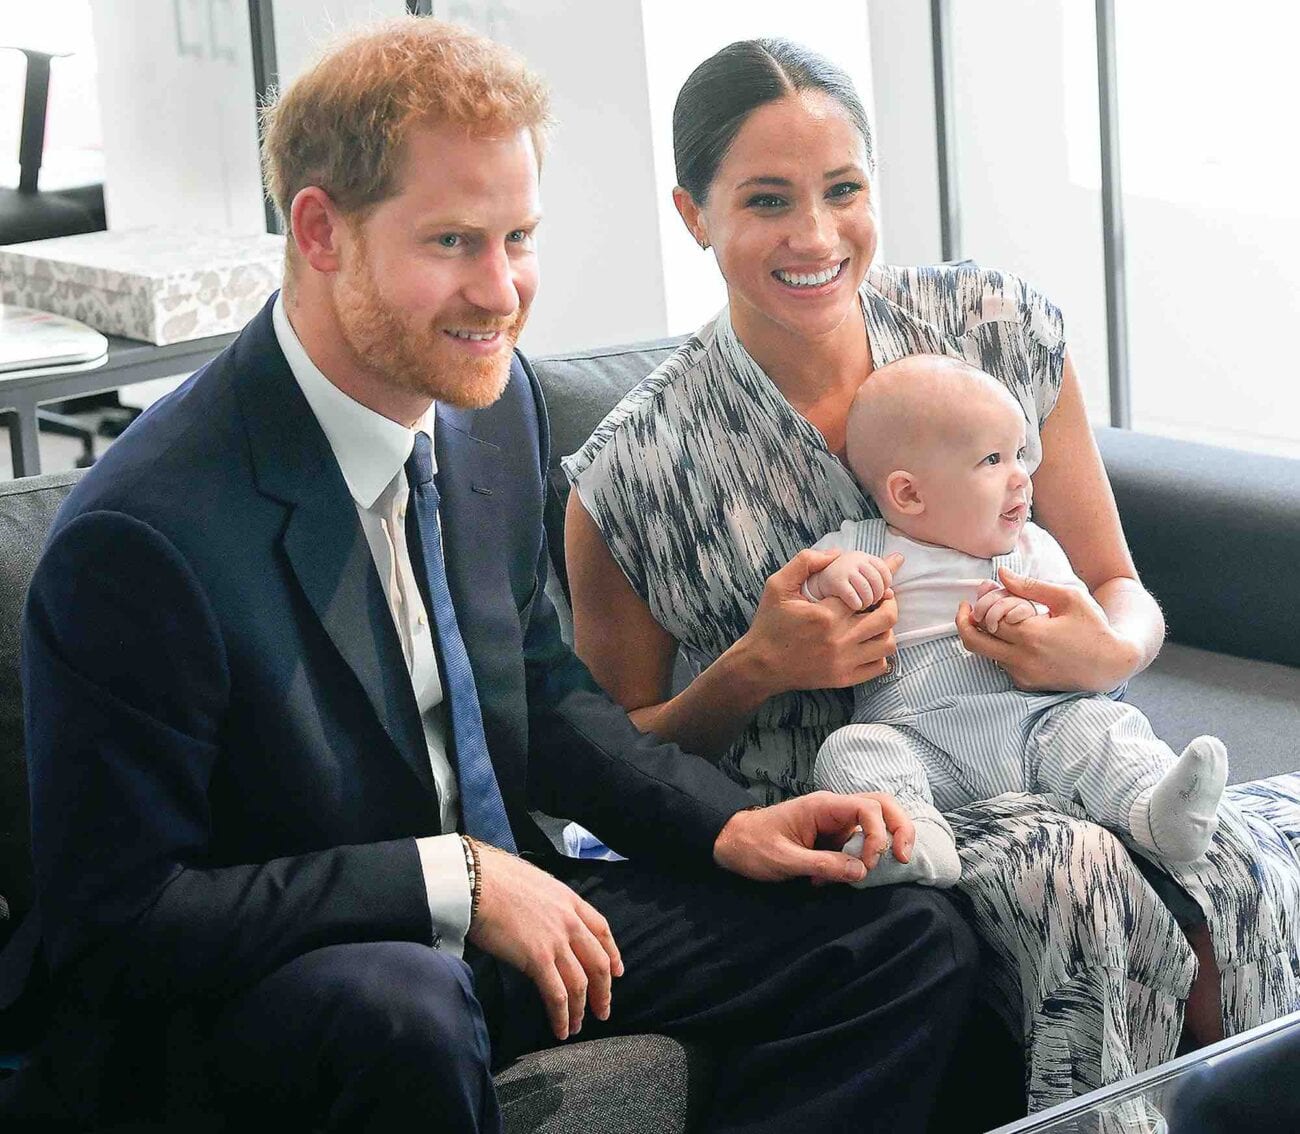 Prince Harry and Meghan Markle welcome their second child into the world. Learn how they've been keeping in touch with other members of the Royal Family.